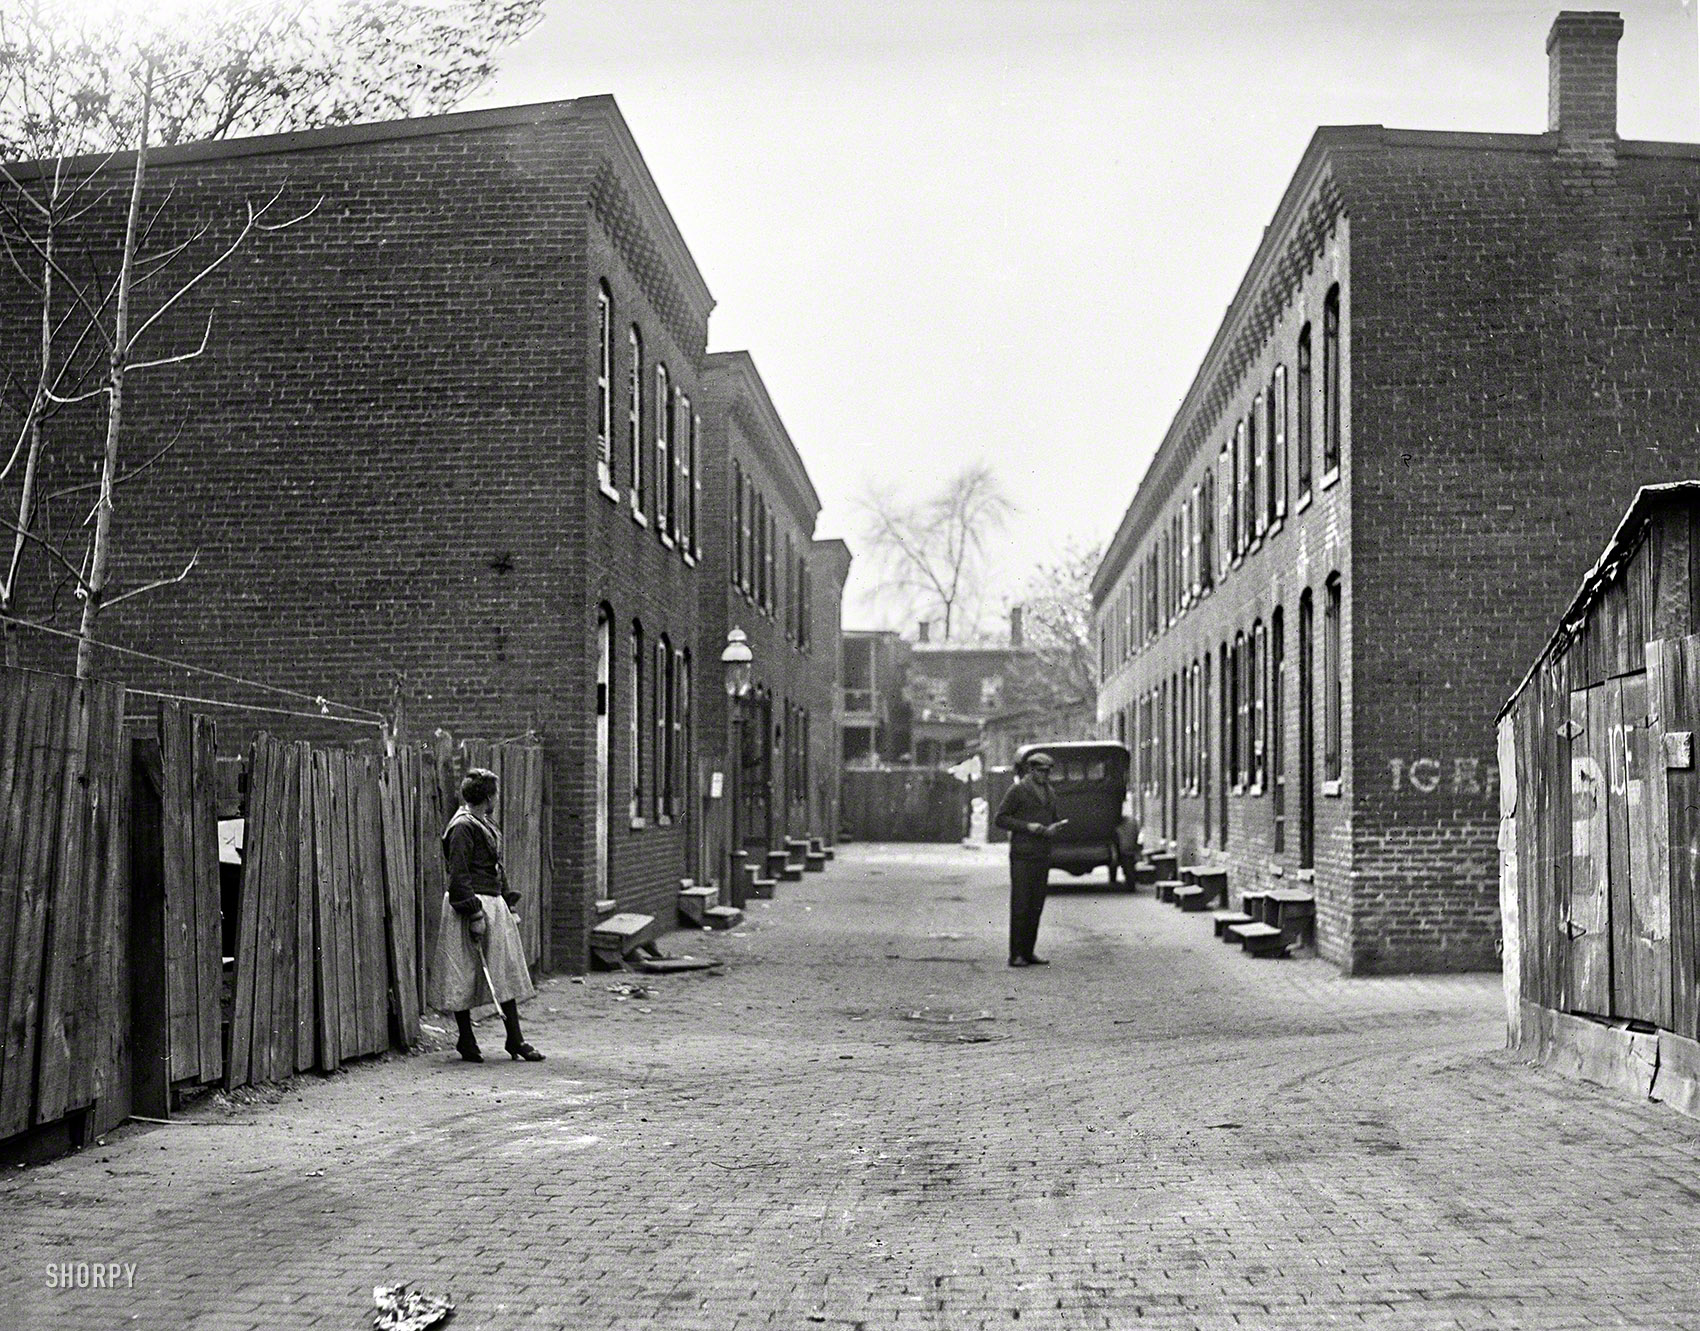 "City rowhouses, 1923." The latest stop on our back-alley tour of Washington, D.C., in a neighborhood convenient to ice. Harris & Ewing negative. View full size.